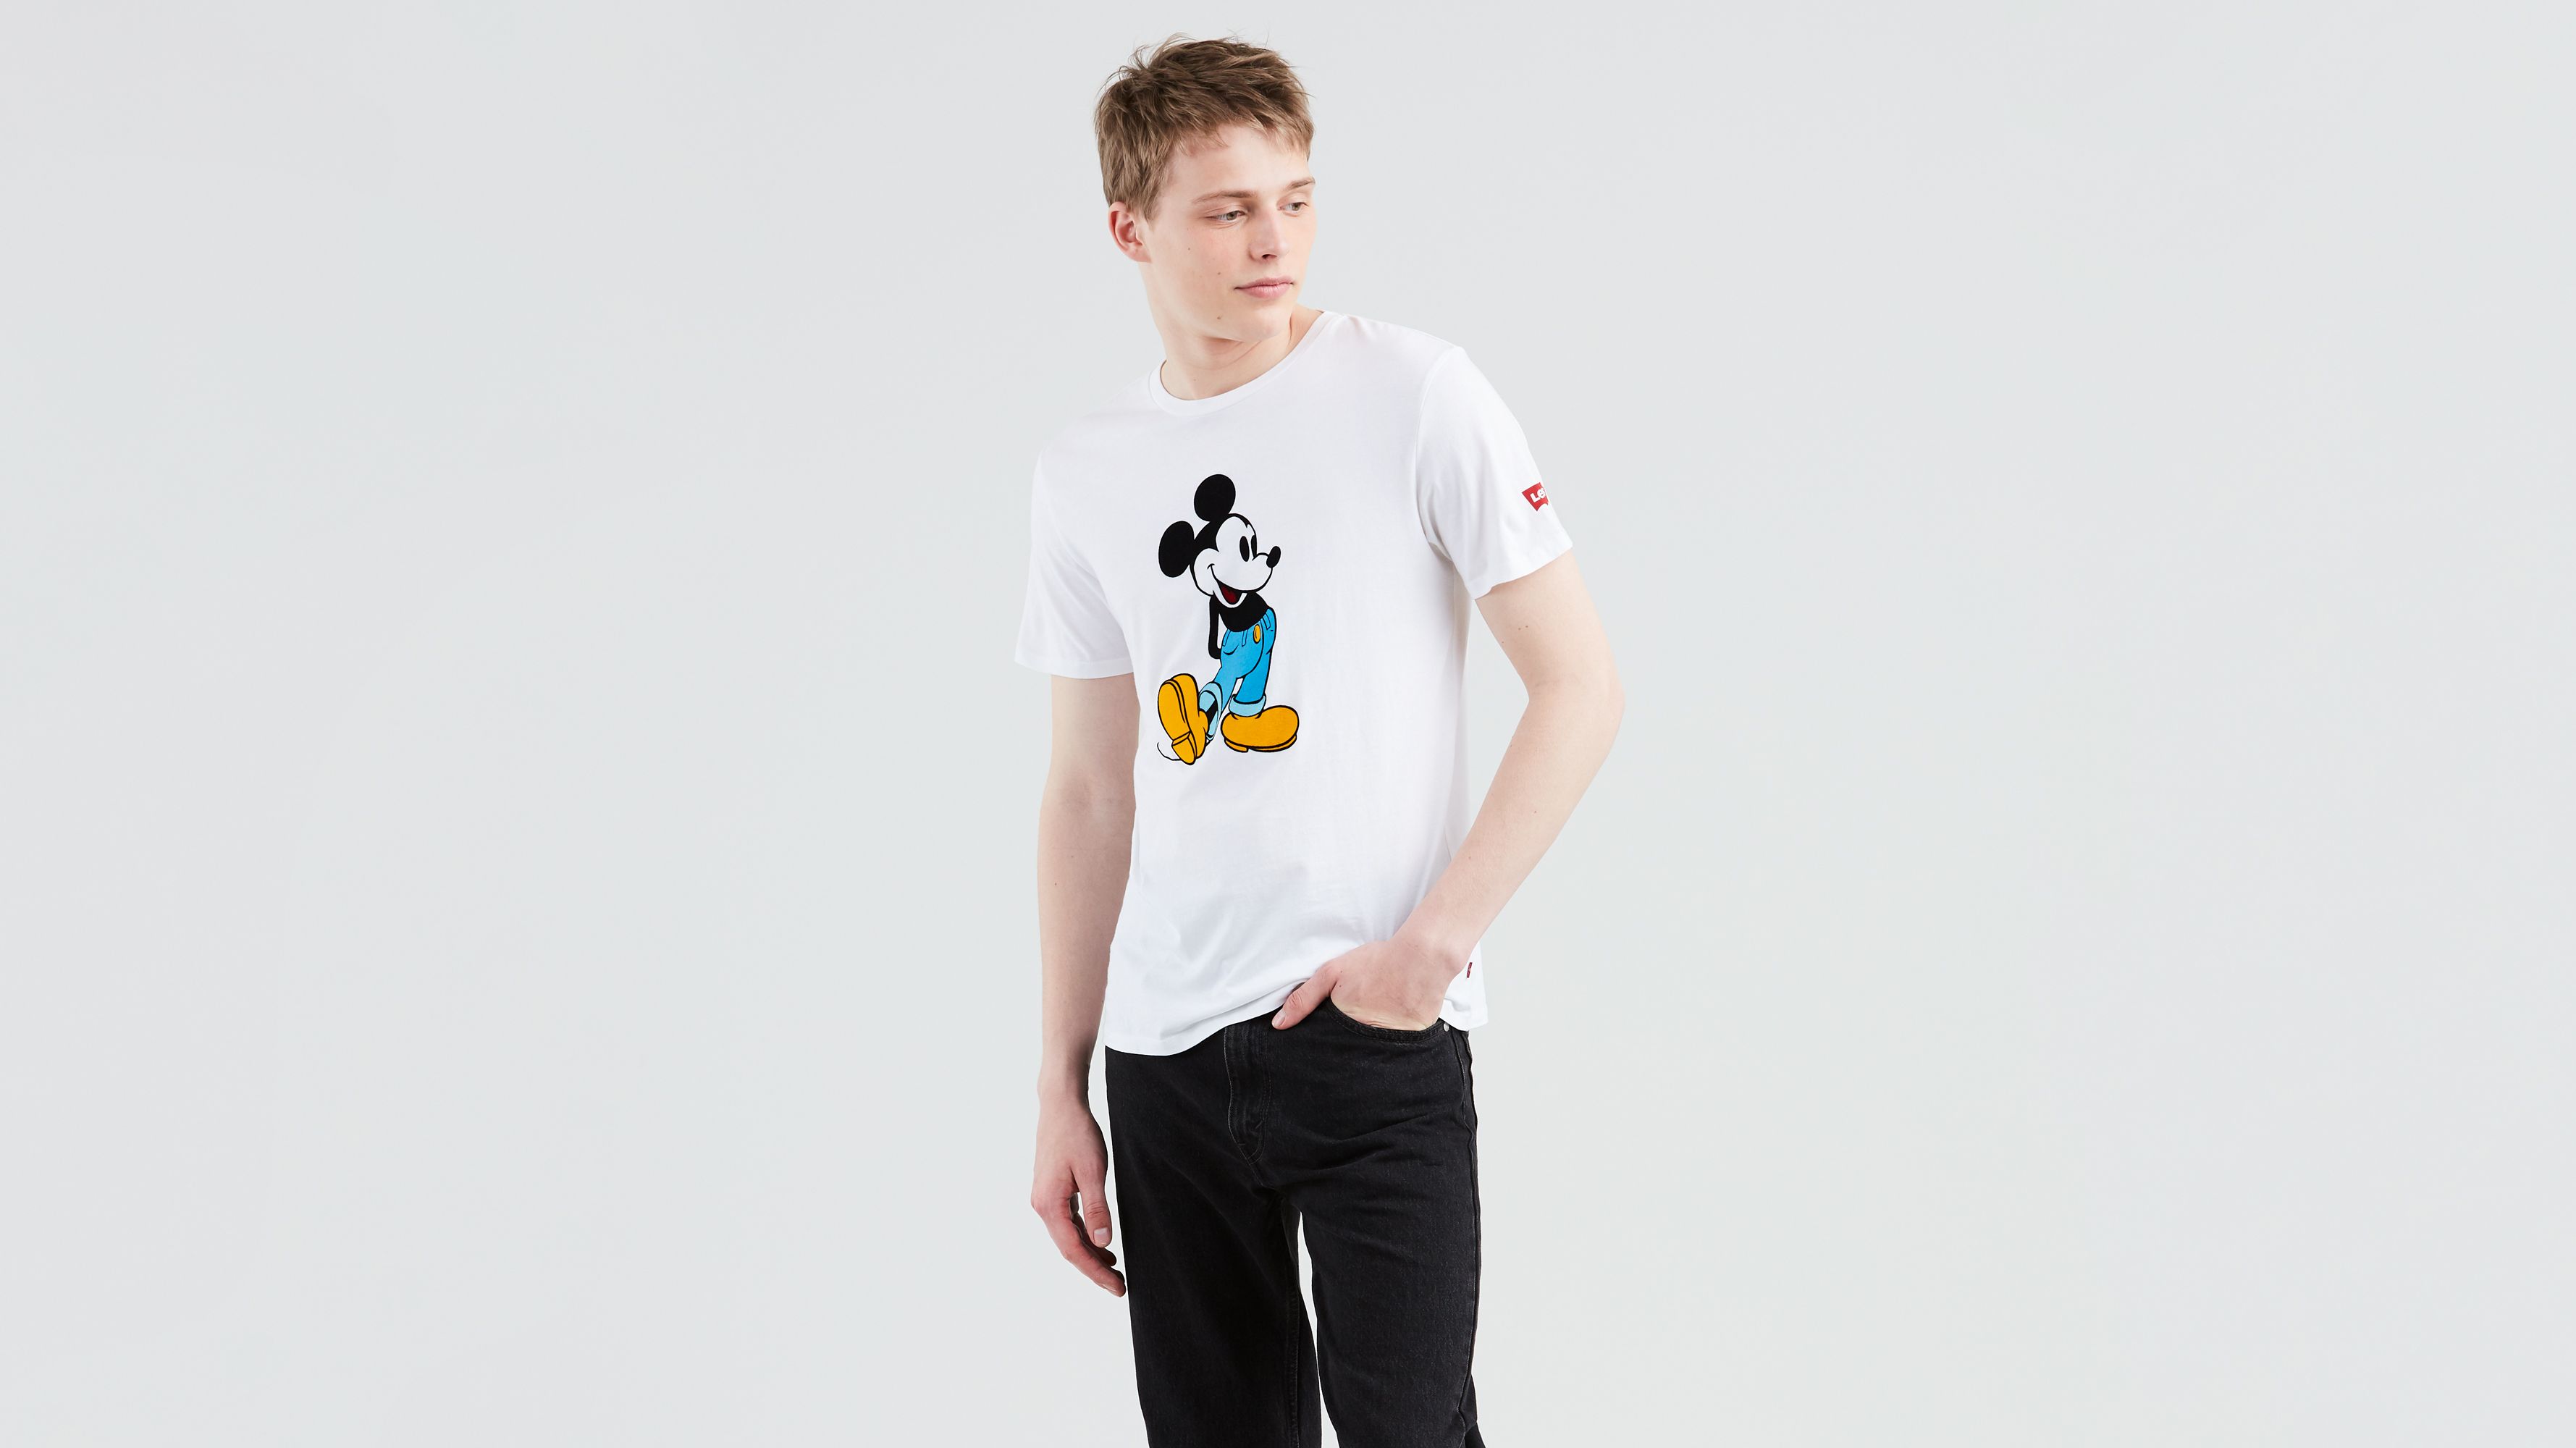 levis t shirt mickey mouse